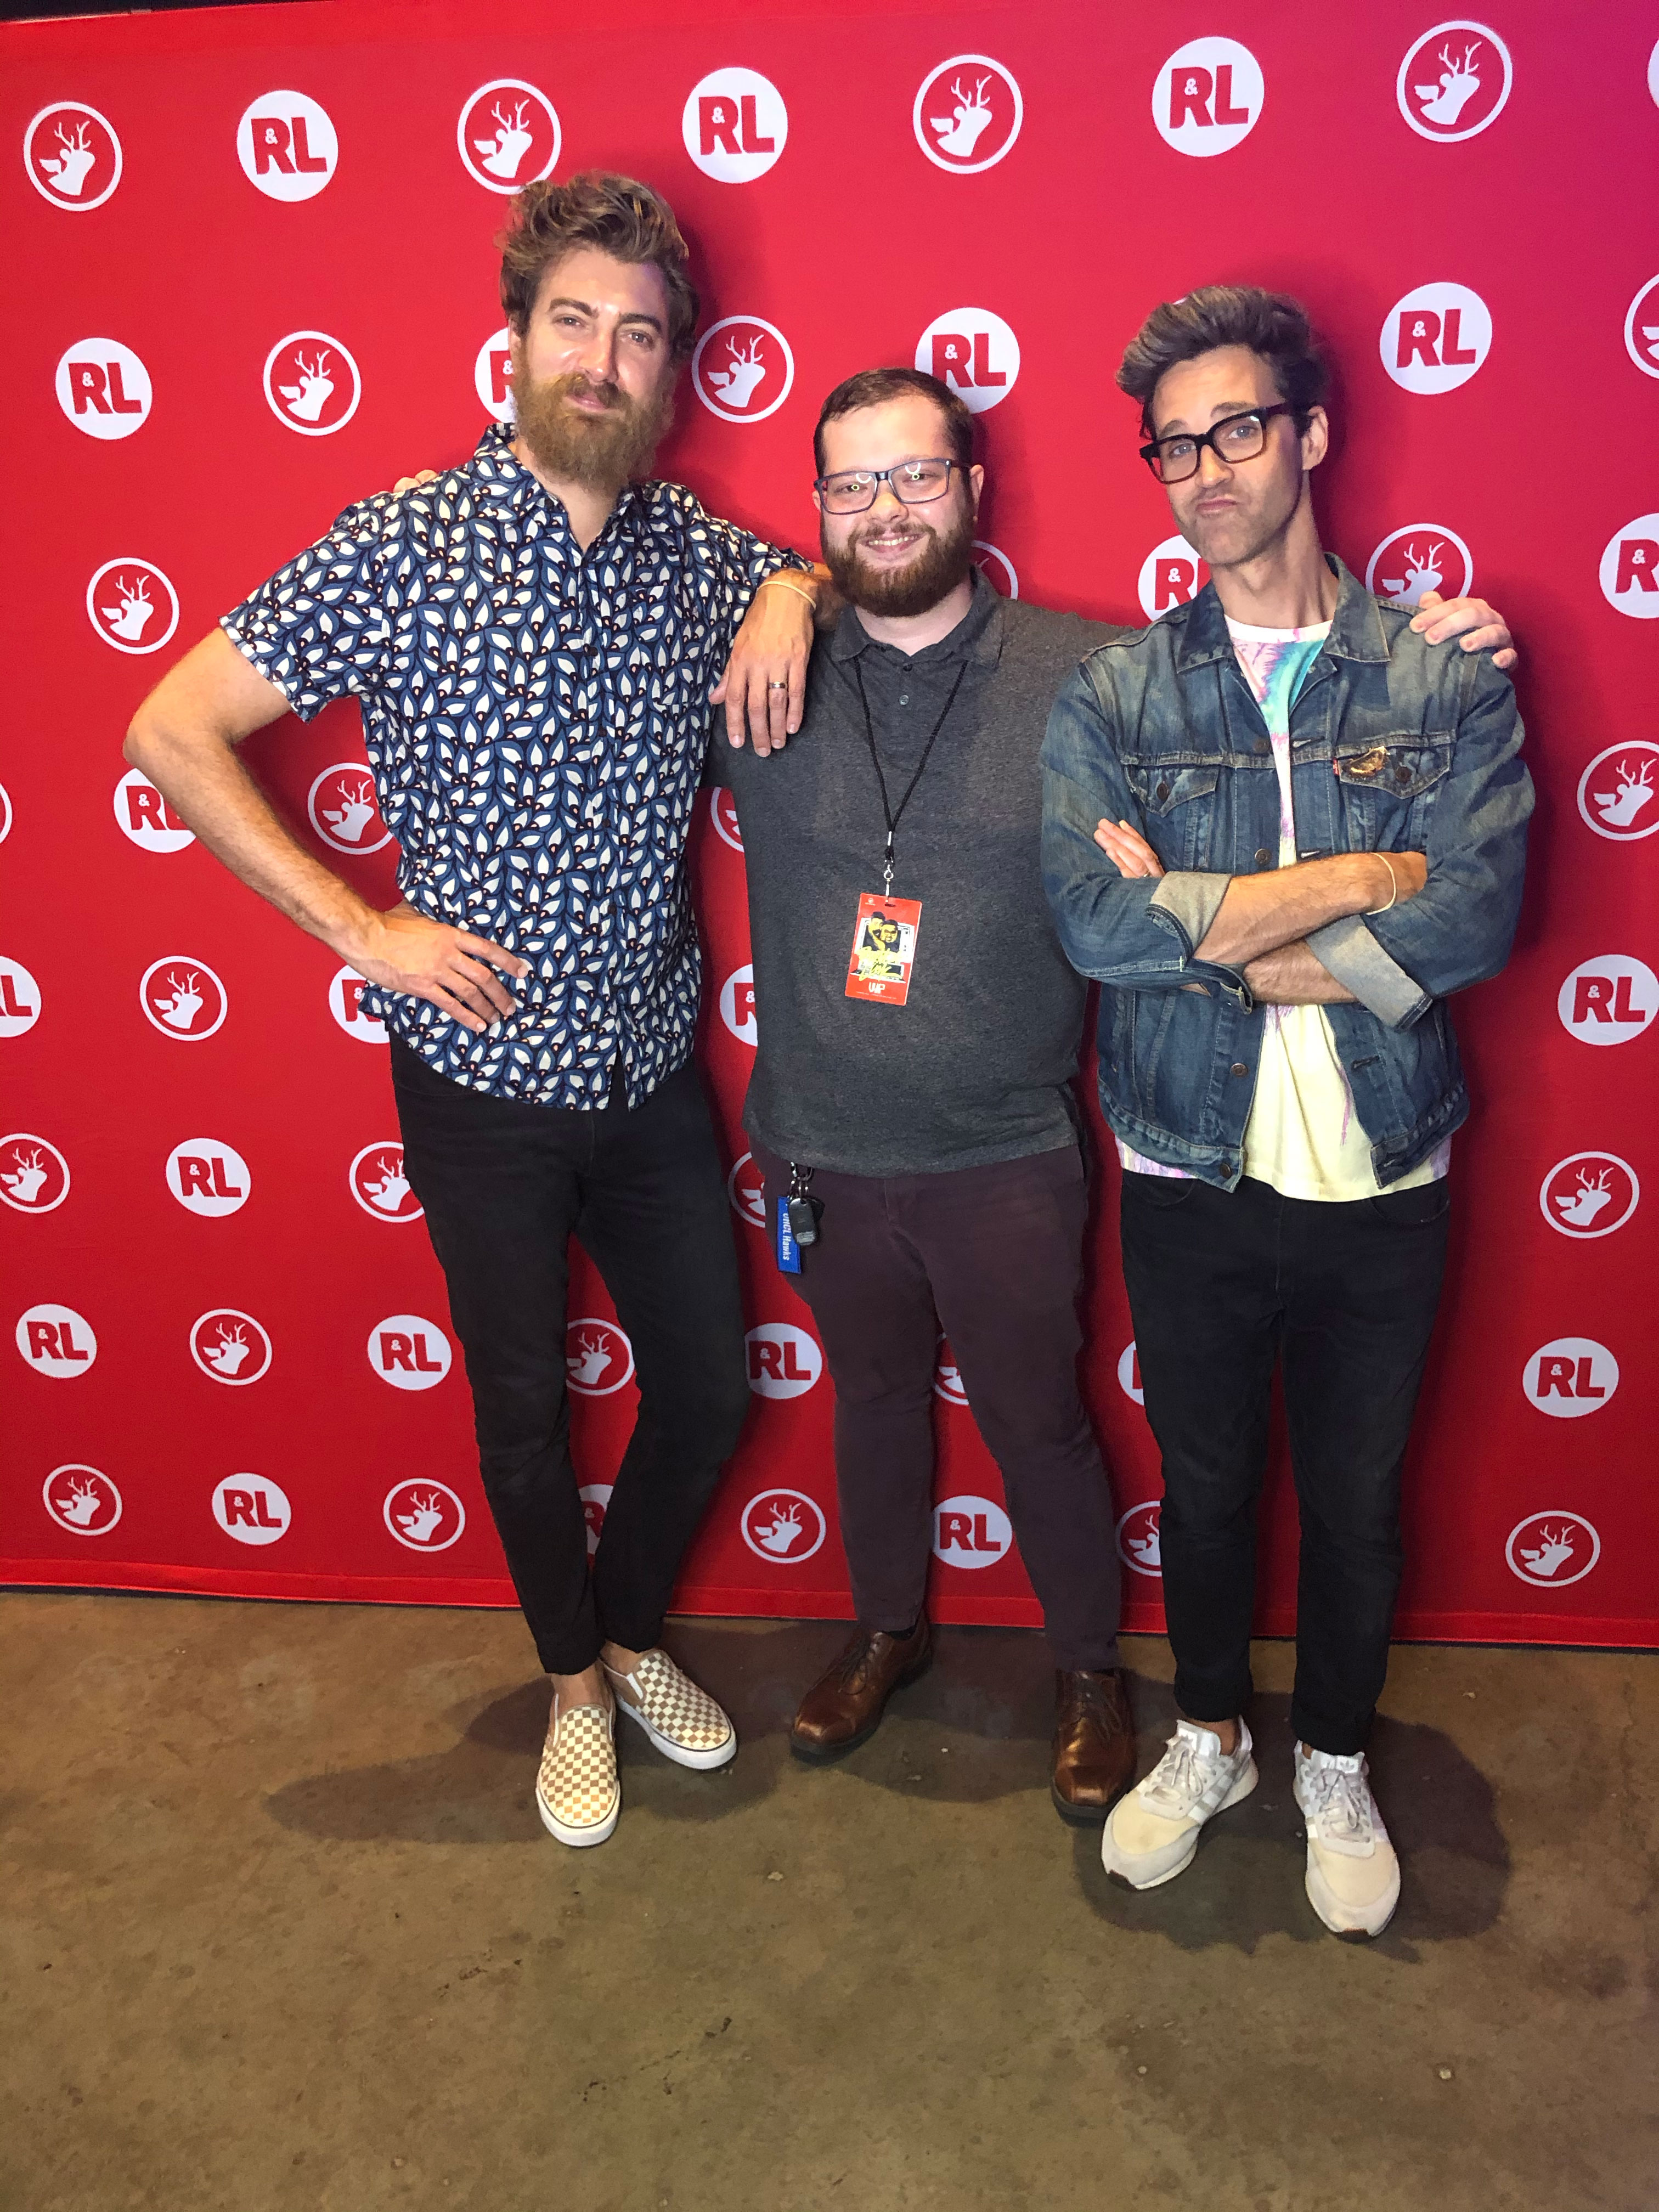 Re Rhett And Link Live In Concert Brings The Mythical Best